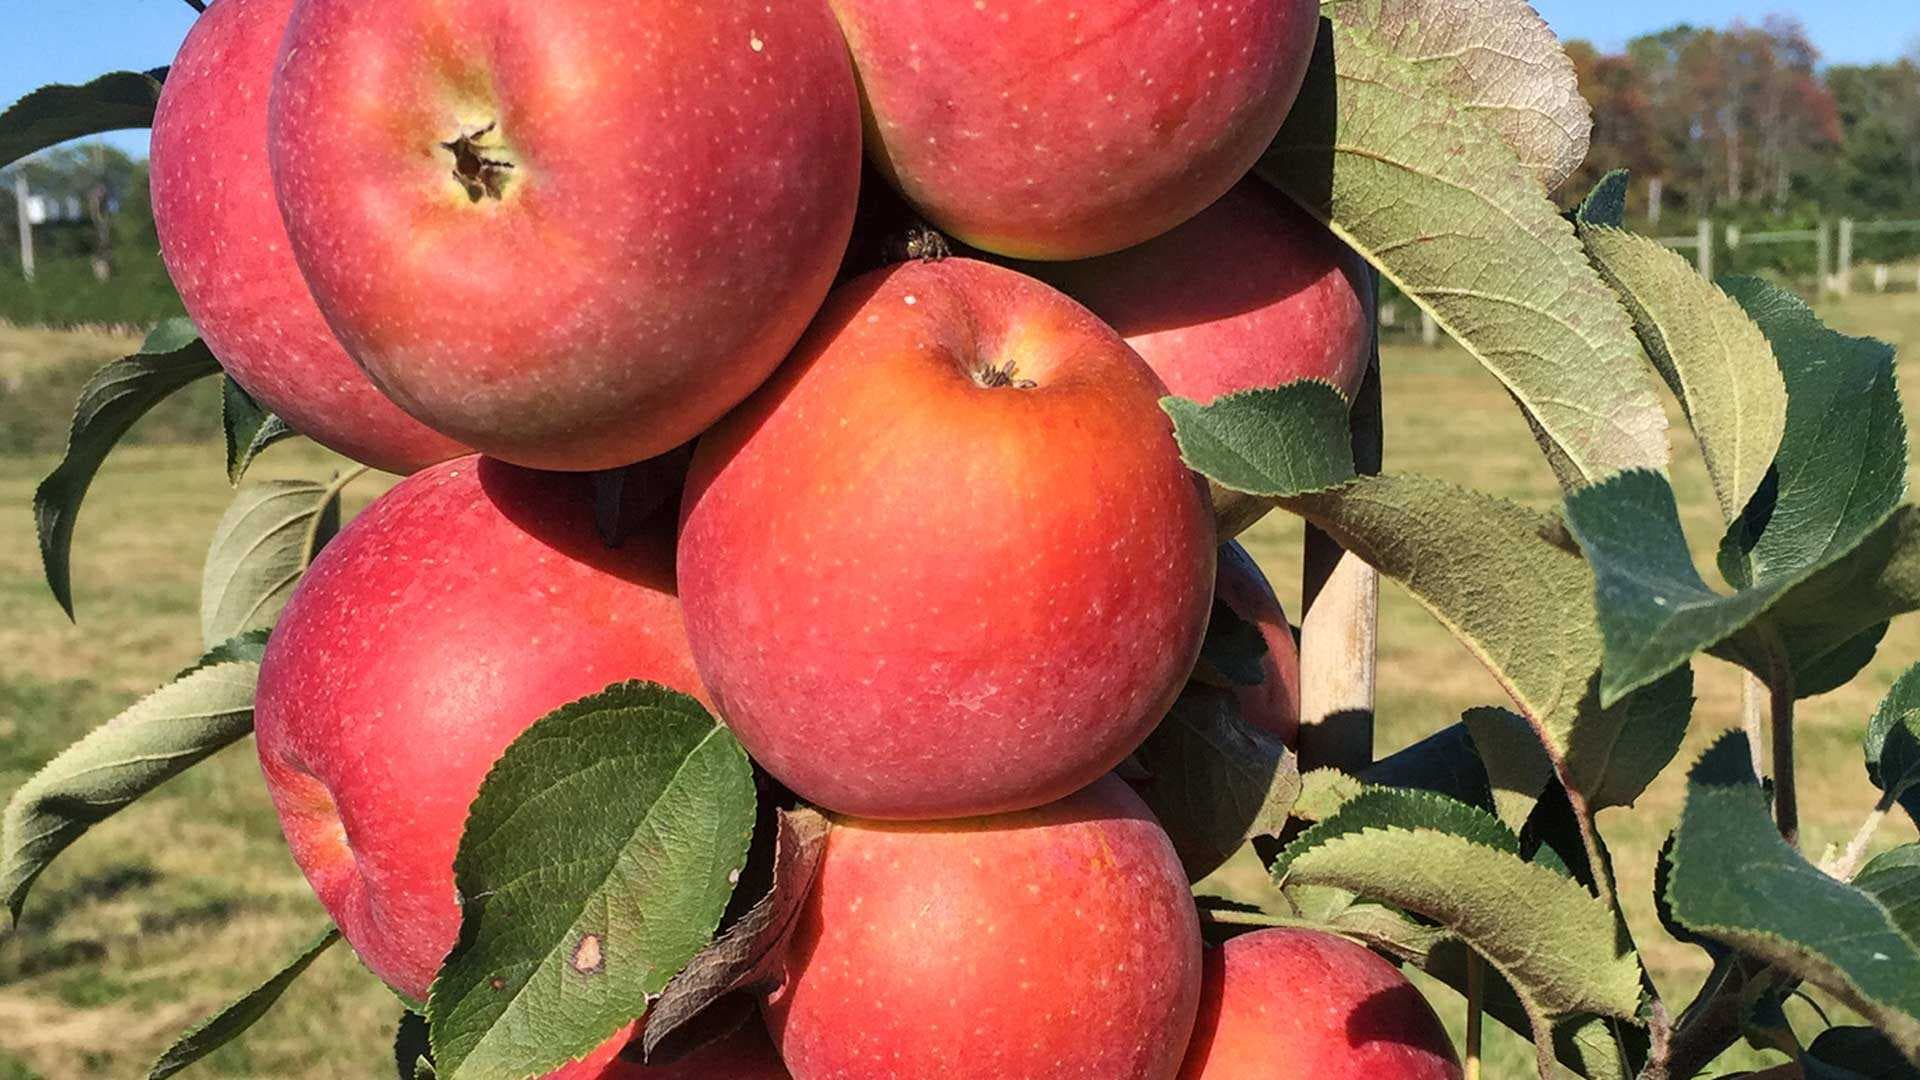 Two new apples developed by a UMD team—one red and one yellow (below)—are far easier to grow and could be better suited to a warming climate than traditional varieties.